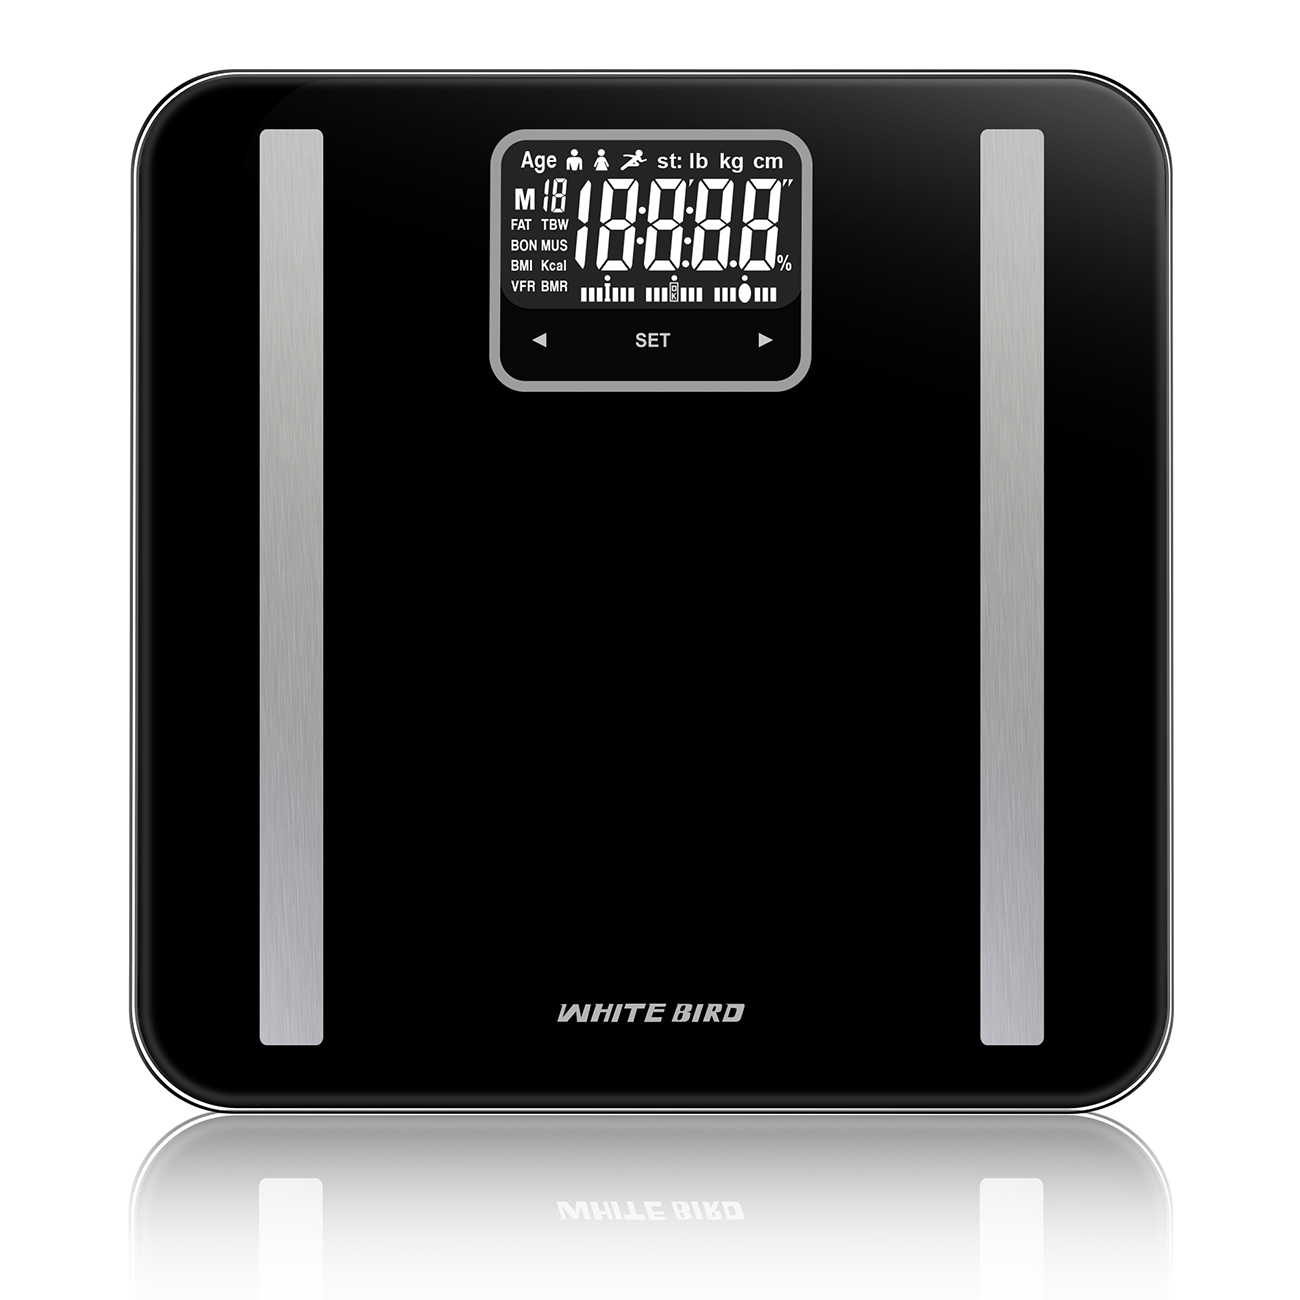 The electronic weight scale measures your health, you deserve it!